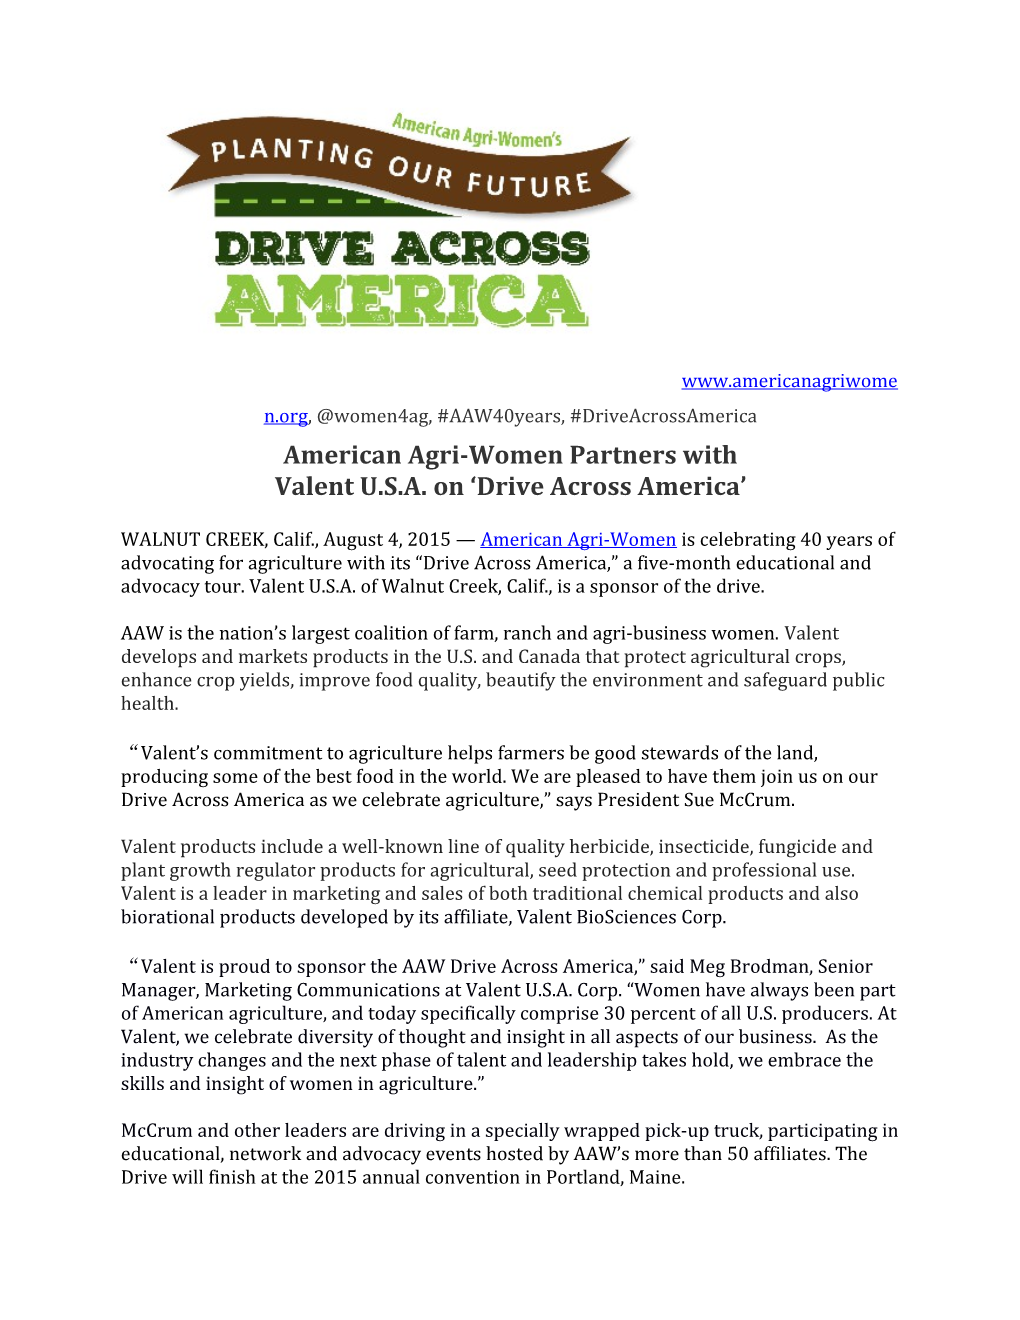 American Agri-Women Partners with Valent U.S.A. on Drive Across America